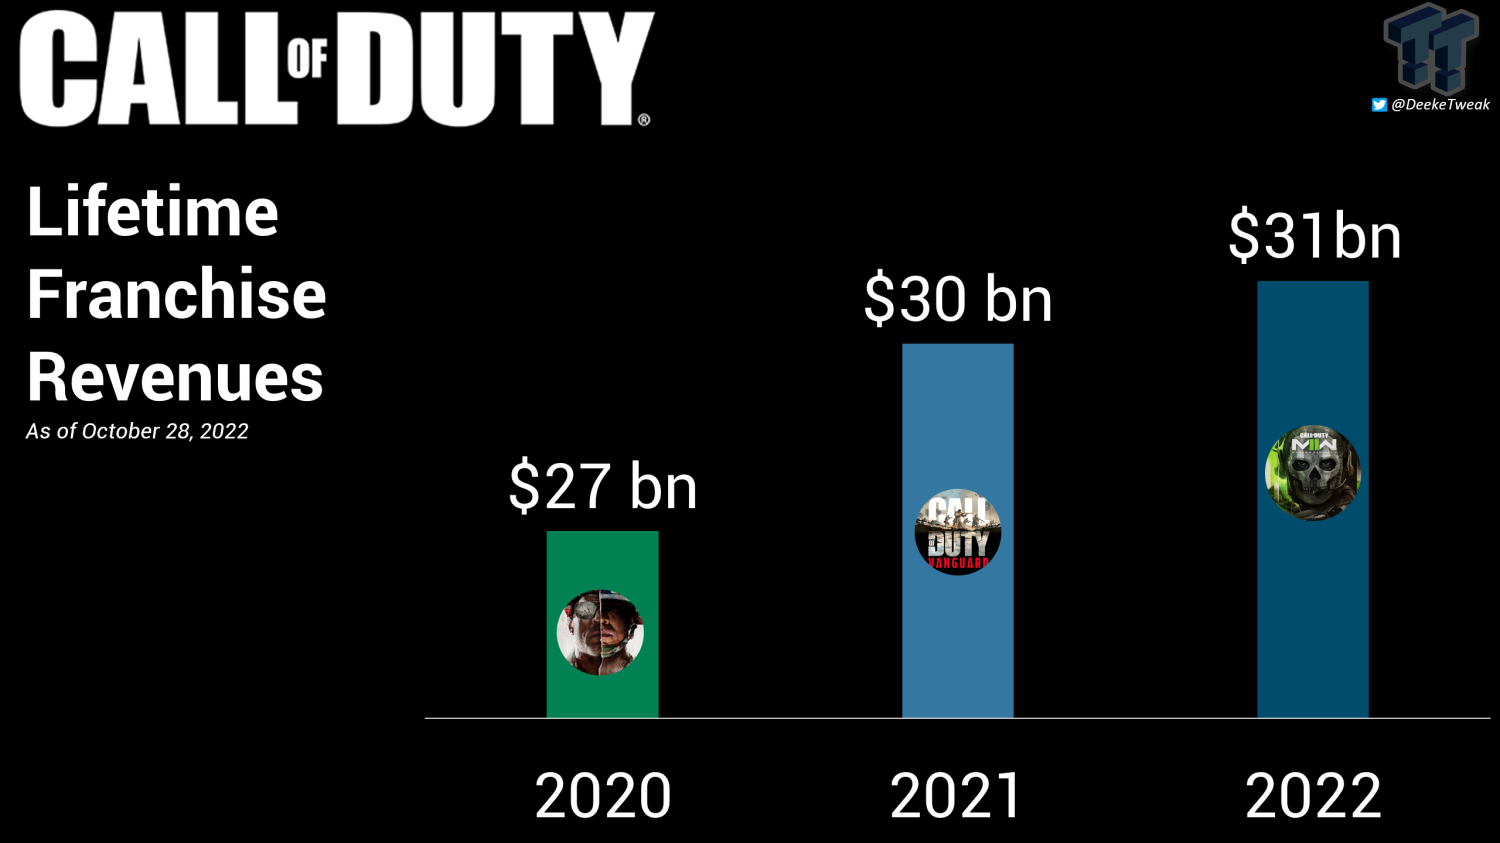 Call of Duty: Mobile has made Activision's massive franchise